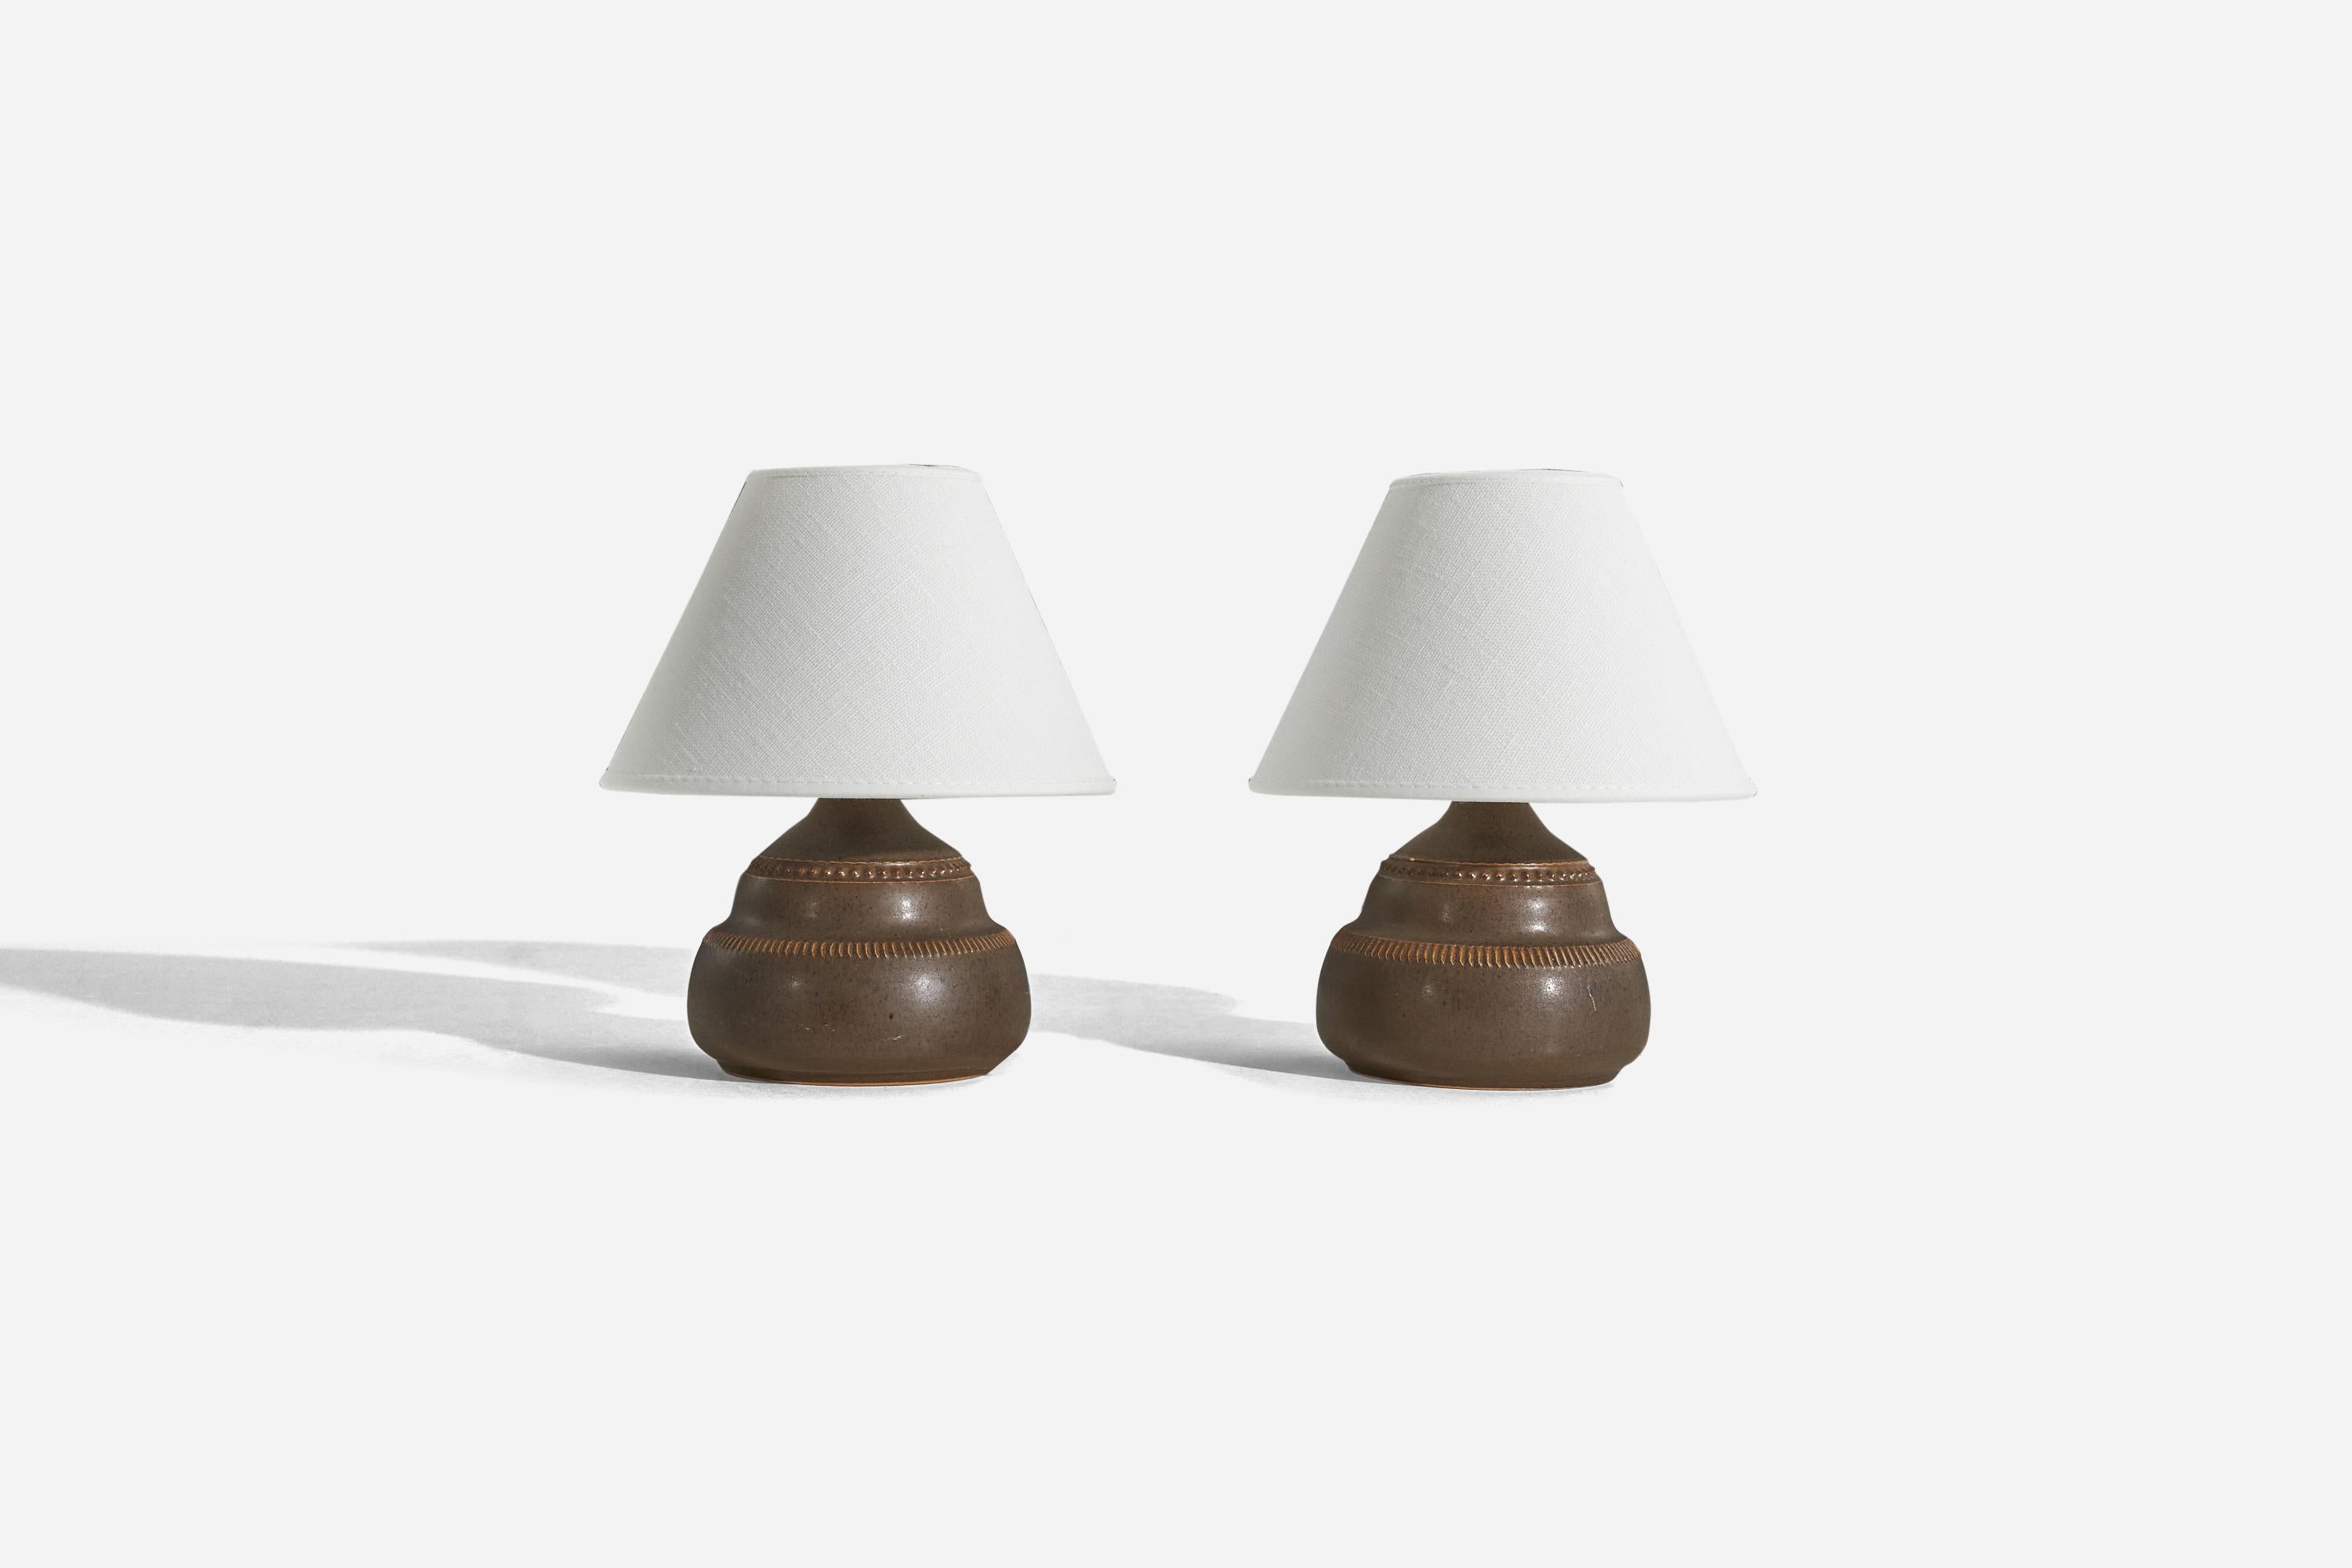 A pair of brown, glazed stoneware table lamps designed and produced by Klase Höganäs, Sweden, c. 1950s. 

Sold without lampshade. 
Dimensions of Lamp (inches) : 6.37 x 4.87 x 4.87 (H x W x D)
Dimensions of Shade (inches) : 3.25 x 7 x 4.75 (T x B